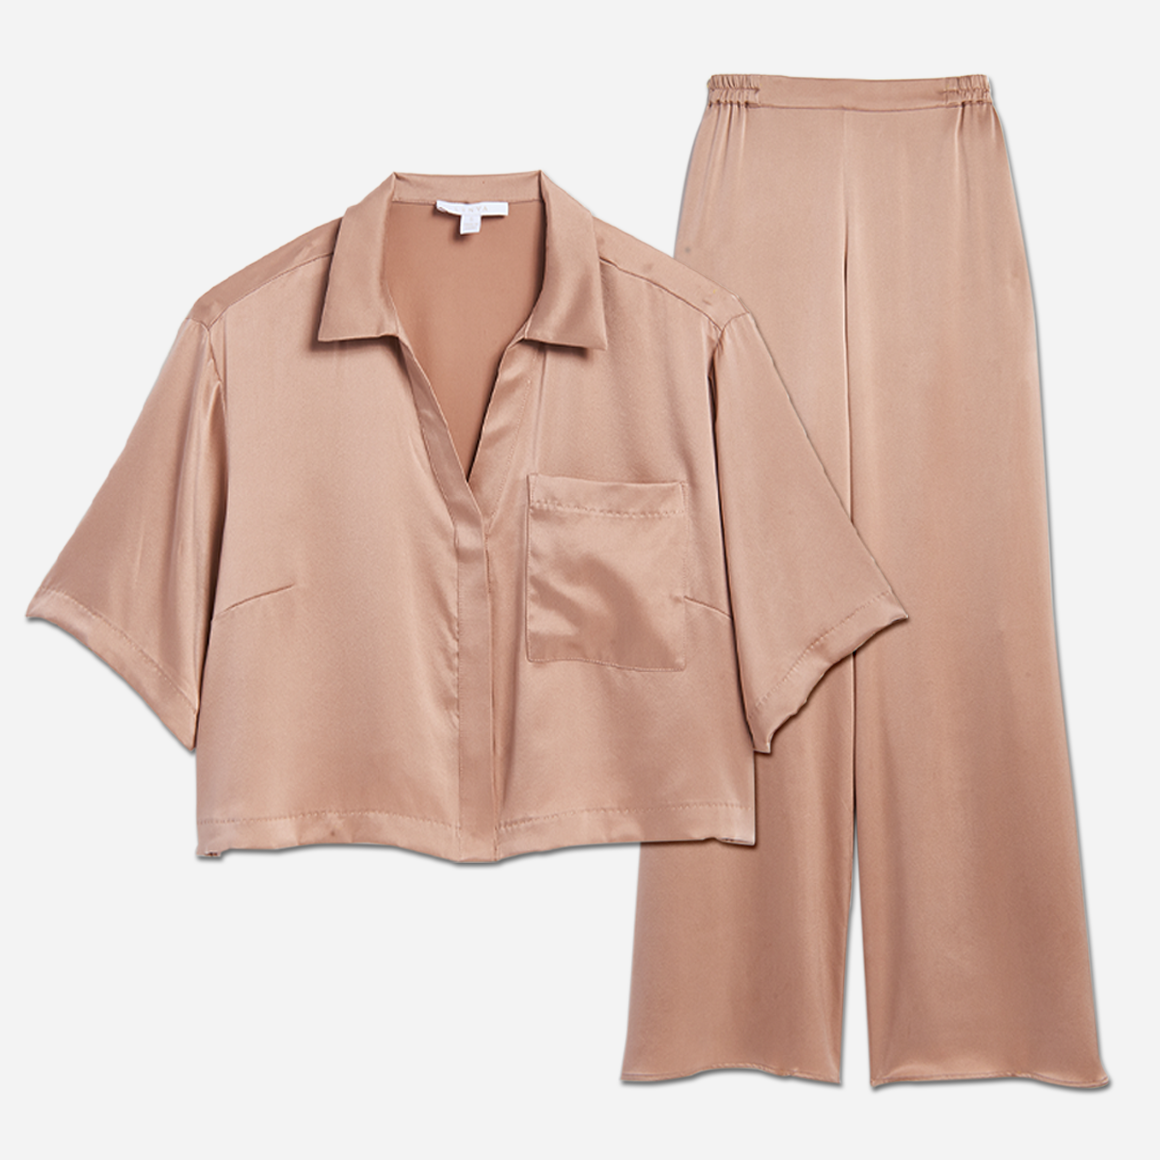 The high-waisted pants have pockets at the hip and side slits at the ankles for added ventilation. The matching short sleeve top is cropped at the waist, has a flattering v-neckline, and chest pocket. The lightweight and breathable fabric makes it perfect for lounging or sleeping, while the elegant design adds a touch of sophistication to your sleepwear collection.